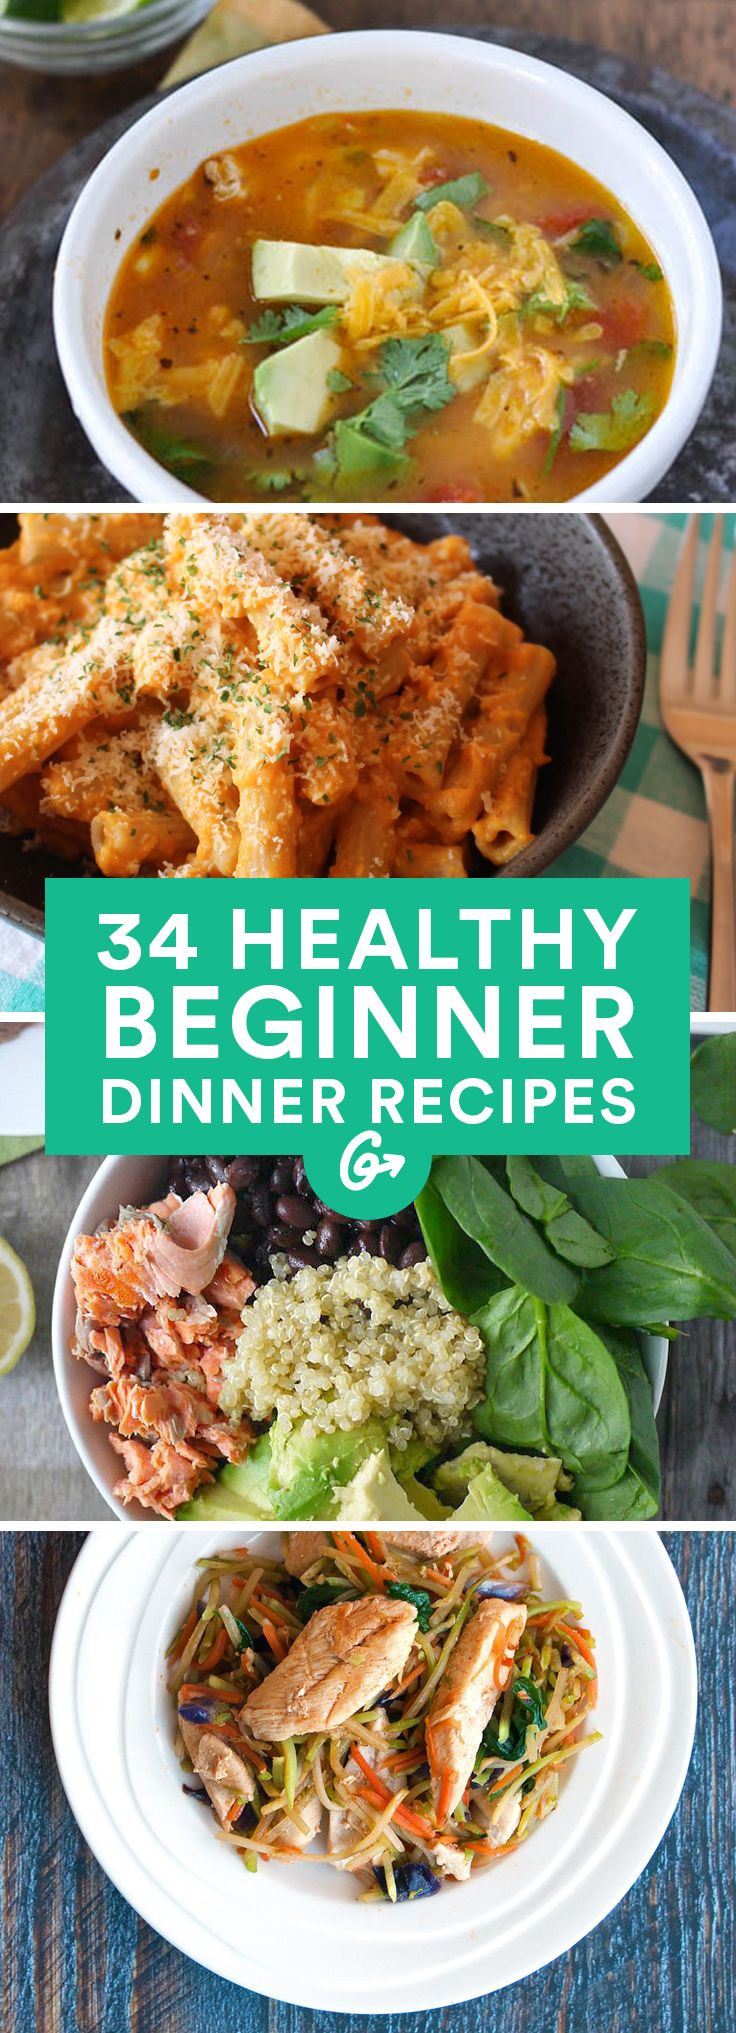 Easy Healthy Dinners To Make
 34 Healthy Dinner Recipes Anyone Can Make